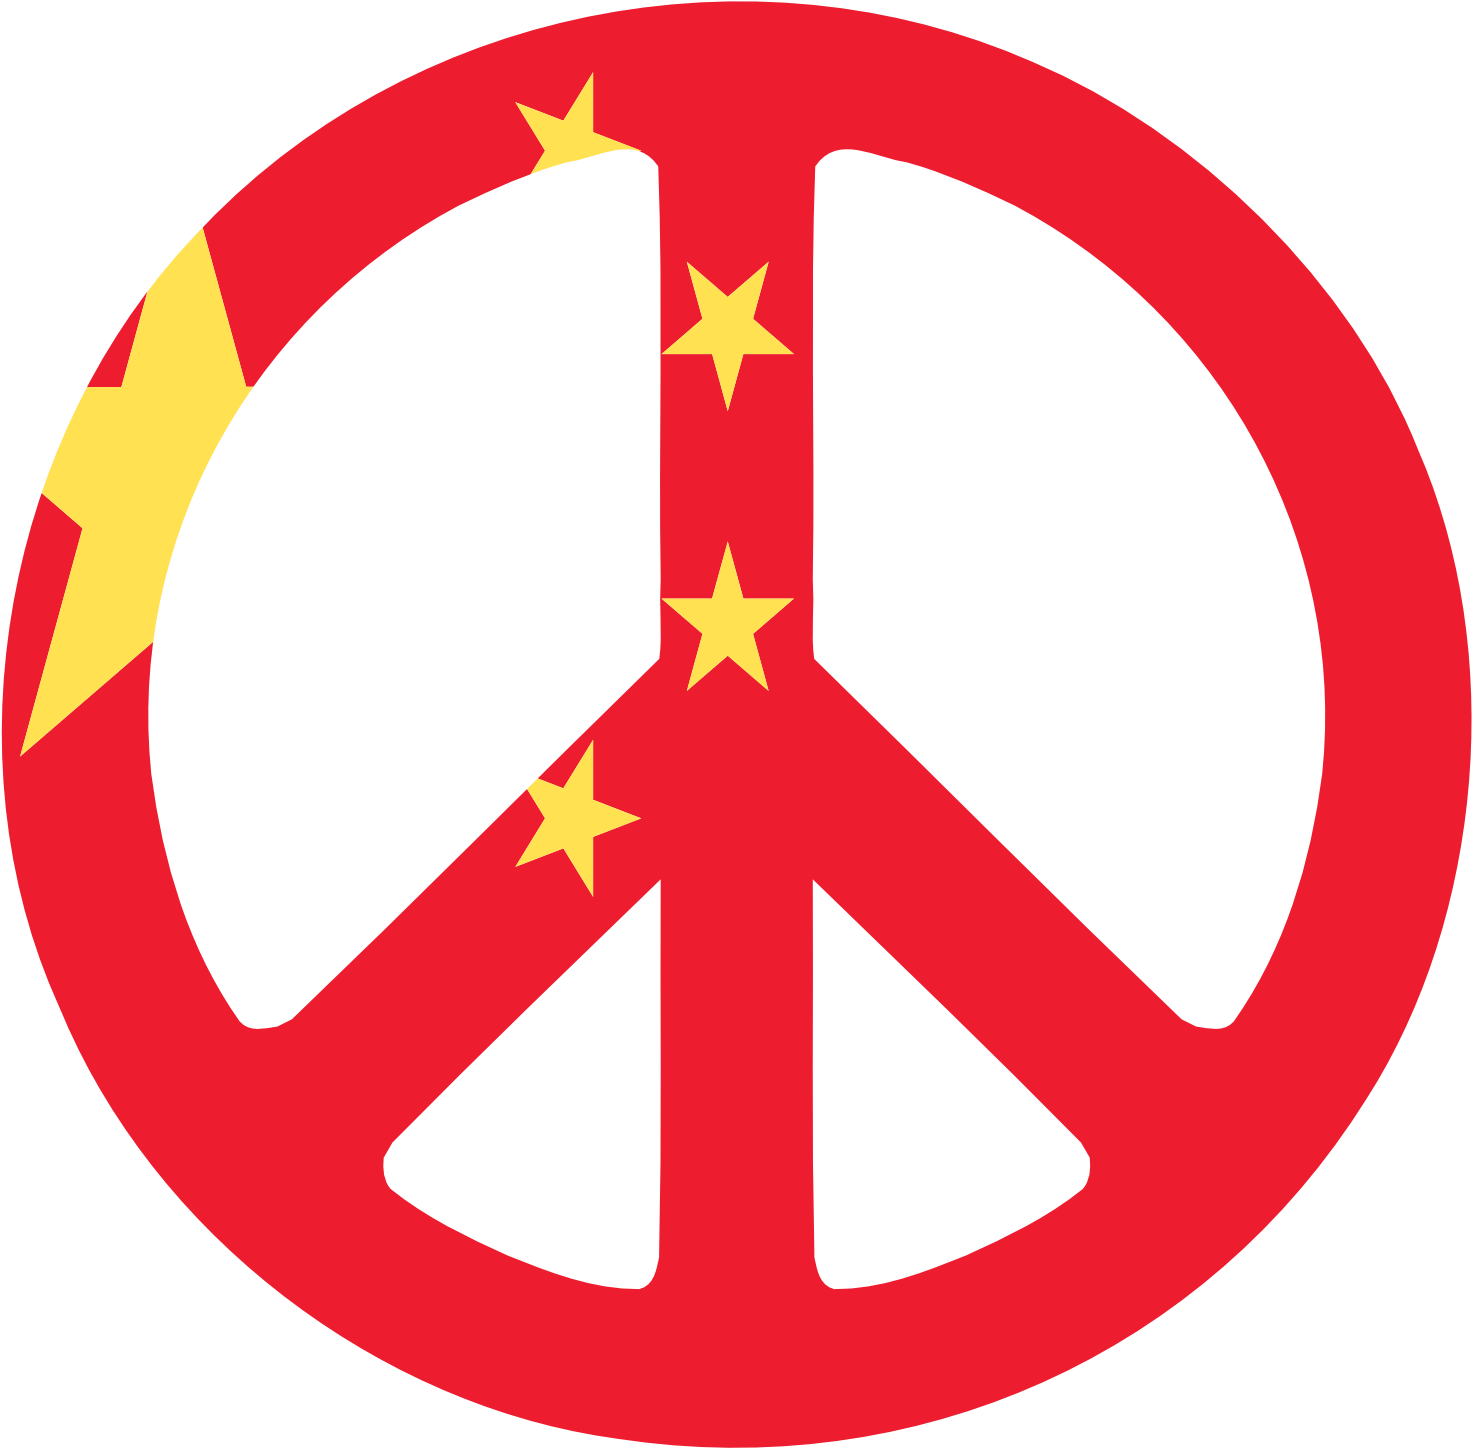 A Peace Sign With Stars And A Flag